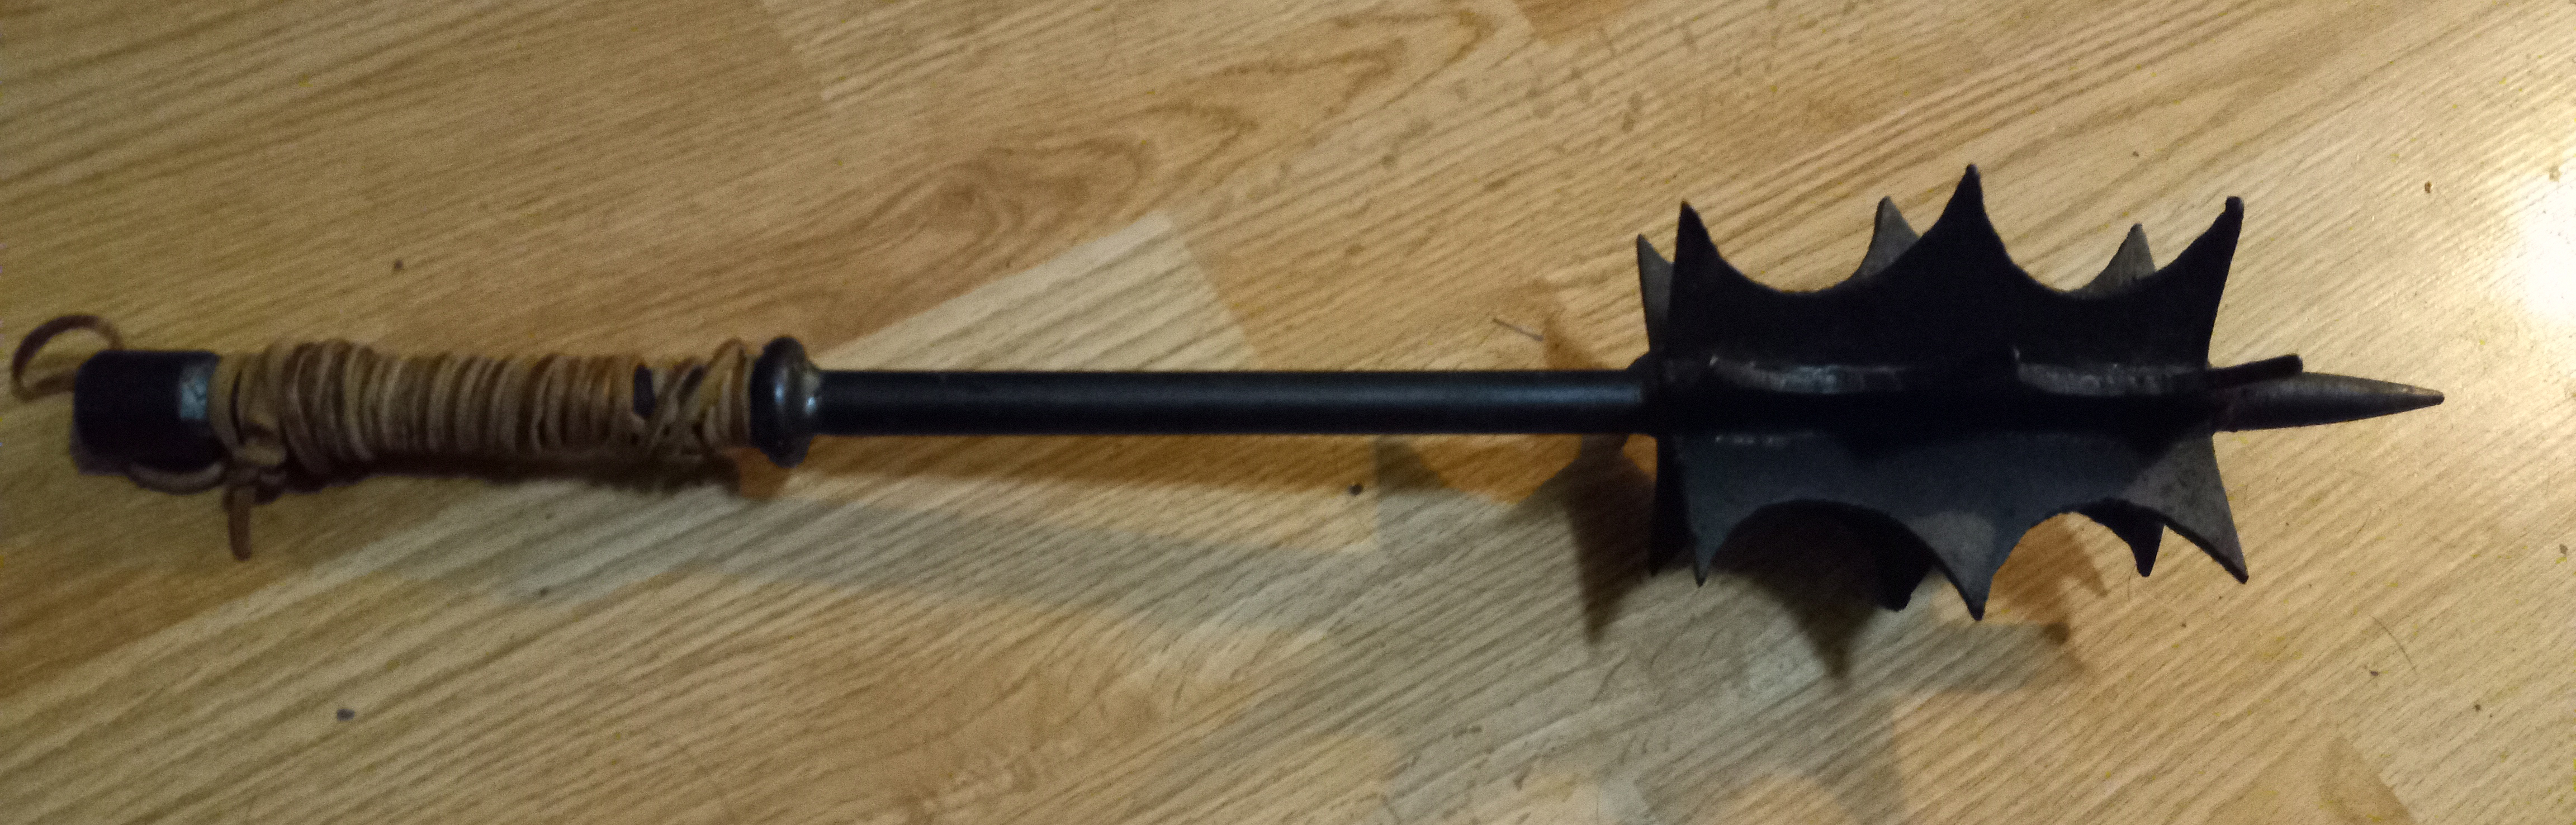 A wrought iron mace with sharp flanges against a wooden floor